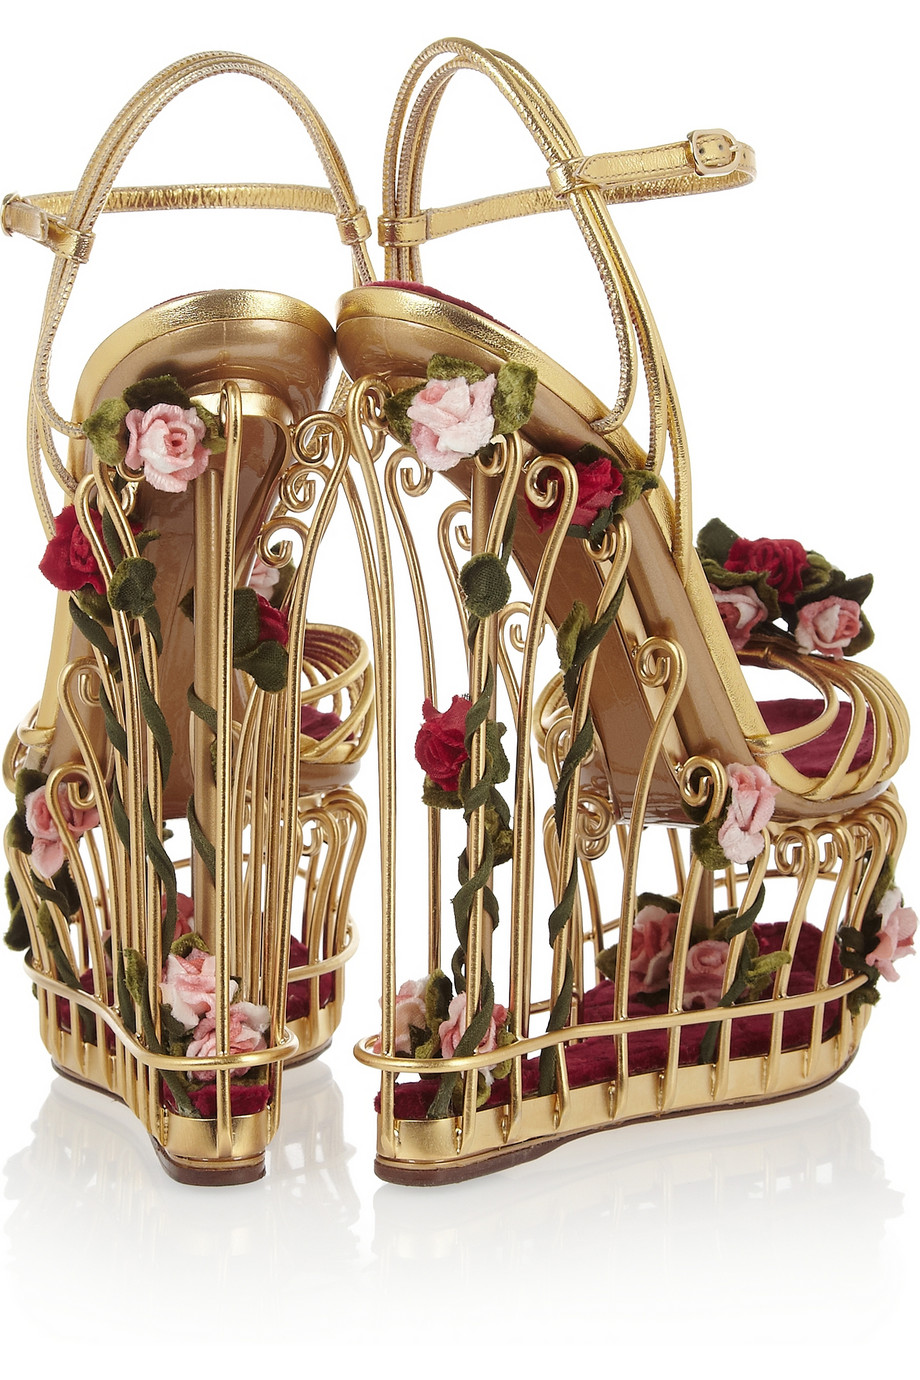 beauty and the beast heels dolce and gabbana